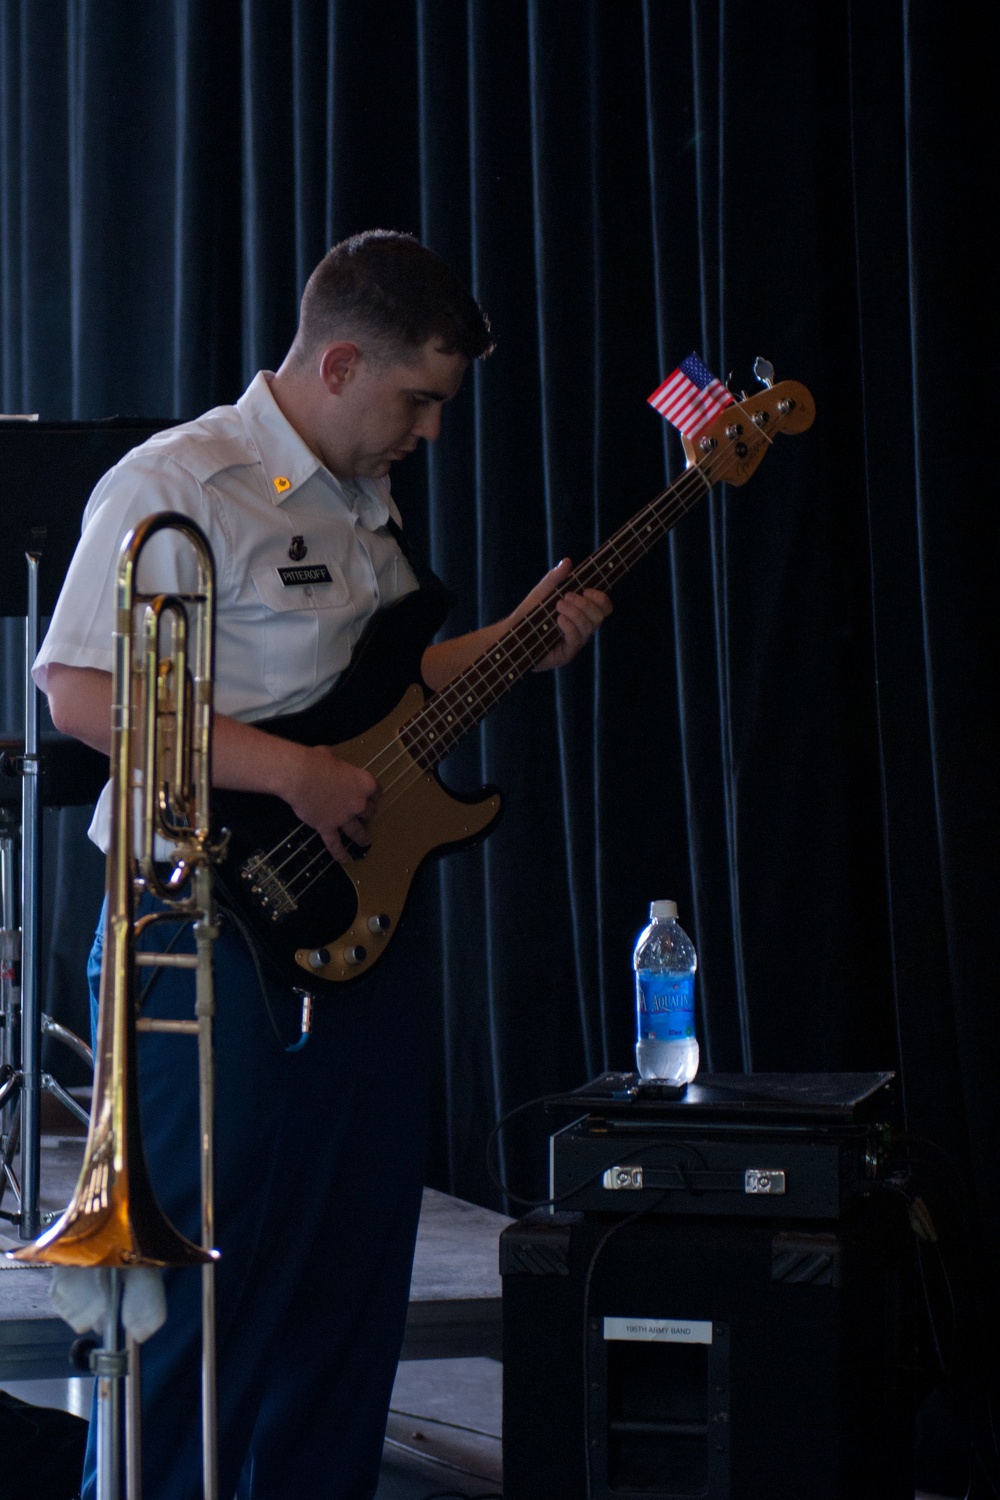 195th Army Band brings tunes to community